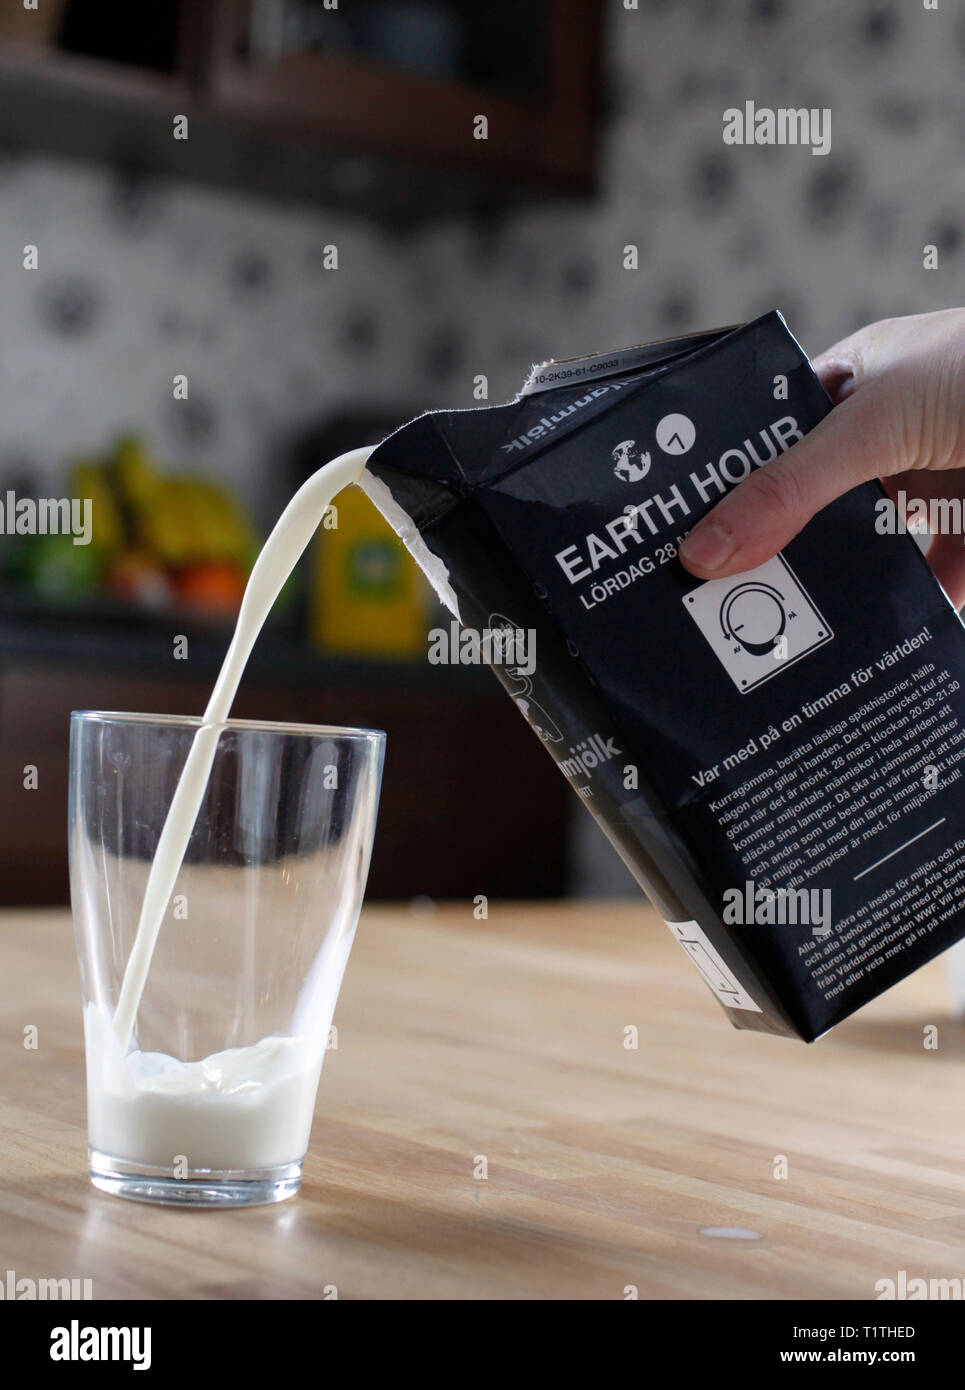 Milk in a glass. Information on a milk package about Earth hour Stock Photo  - Alamy